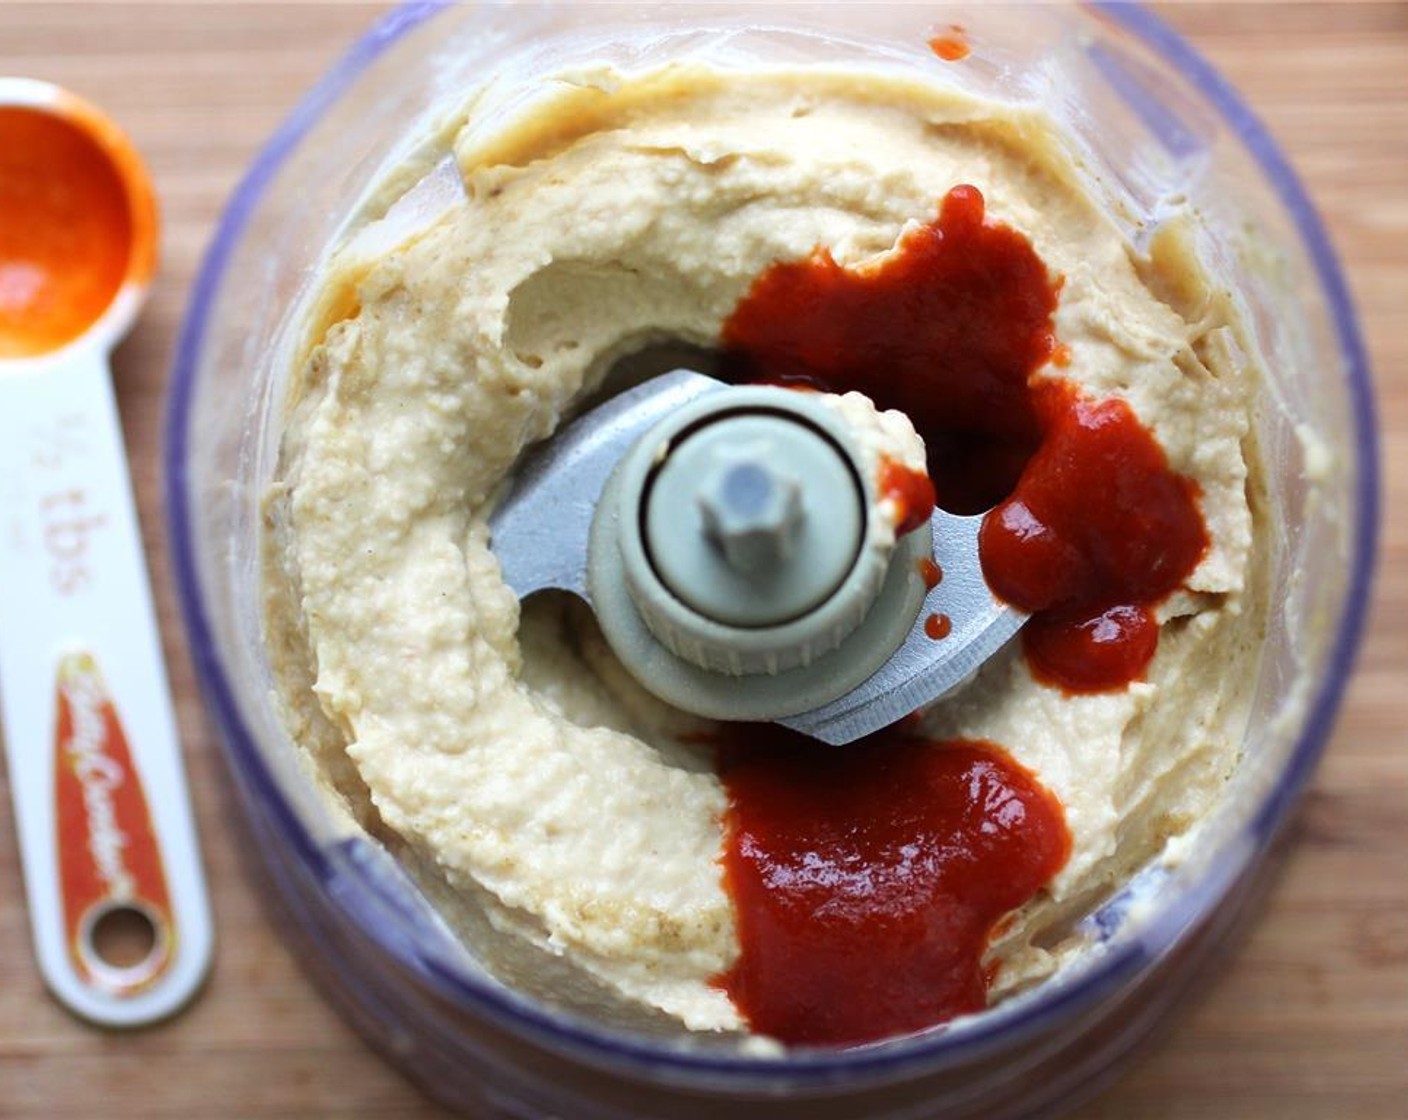 step 3 Blend until smooth. Add Sriracha (1 Tbsp), 1/2 tbsp at a time to the food processor, taste testing as you go.